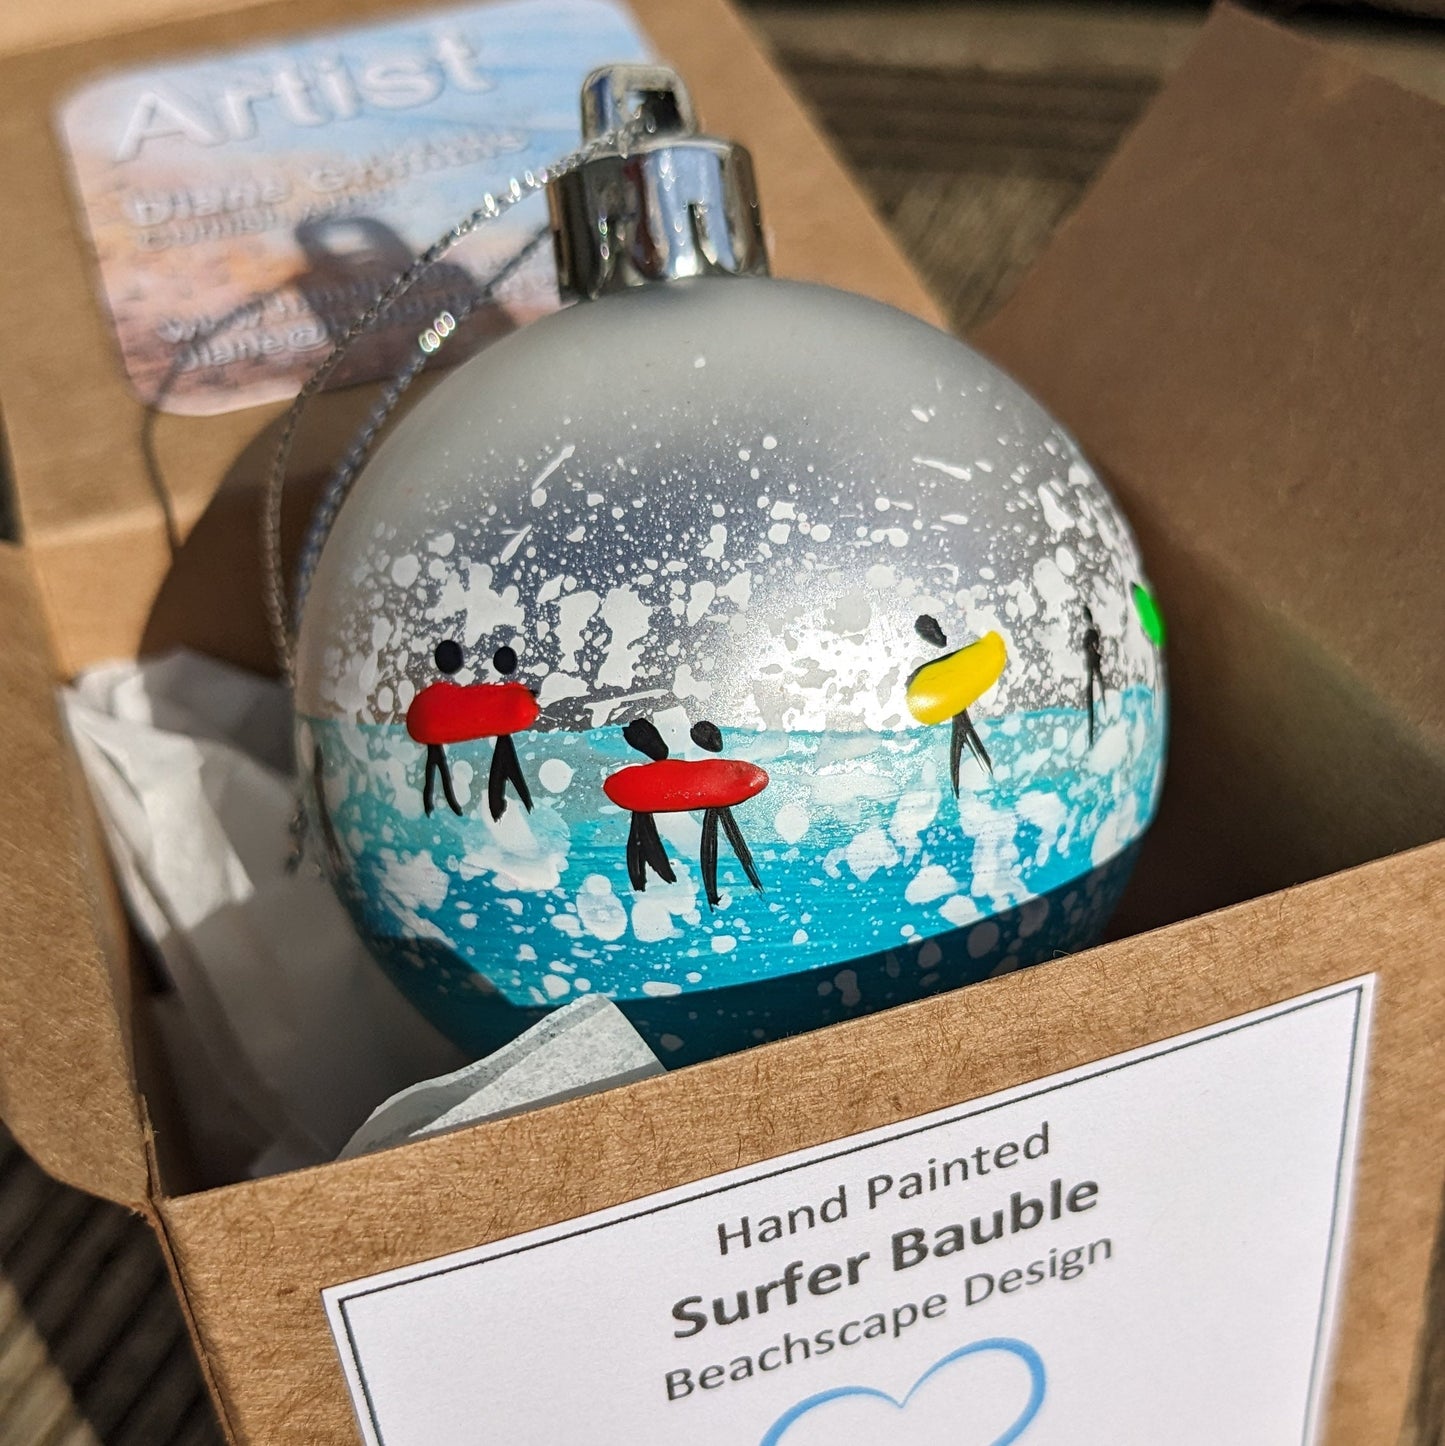 Hand Painted Bauble - Looe - Choose Colour